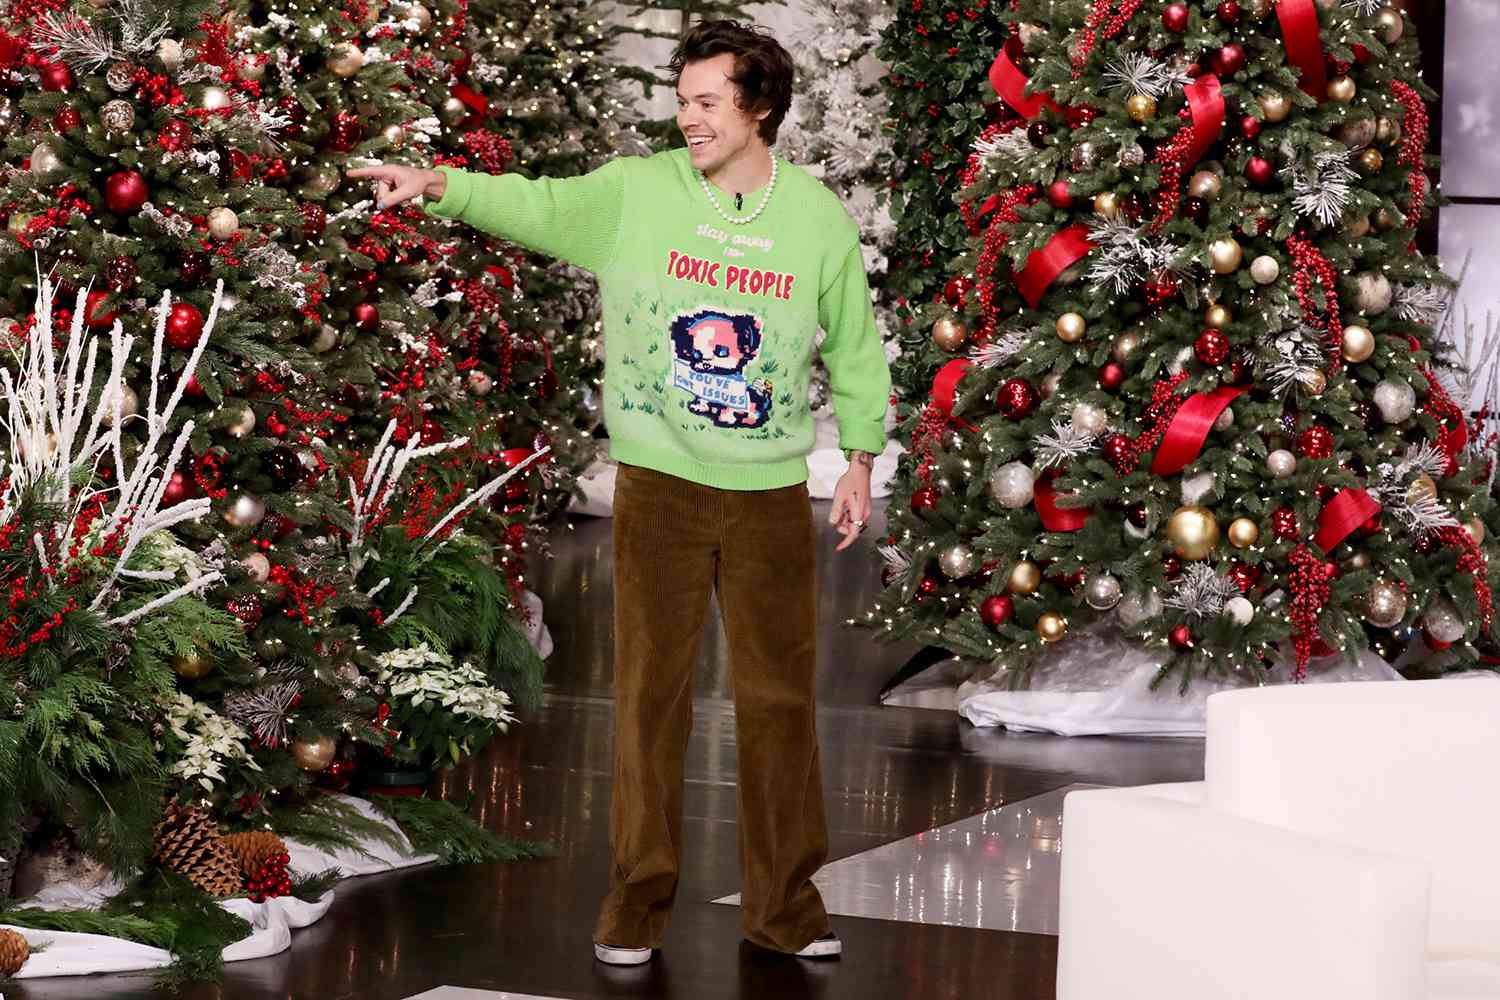 Harry Styles sits down for an exclusive interview on “The Ellen DeGeneres Show” airing Wednesday, December 18th to discuss his hit sophomore solo album, “Fine Line.” Harry chats about his decision to travel alone to Japan for one month, and explains how he ended up posing nude for the artwork inside the vinyl edition of “Fine Line.”